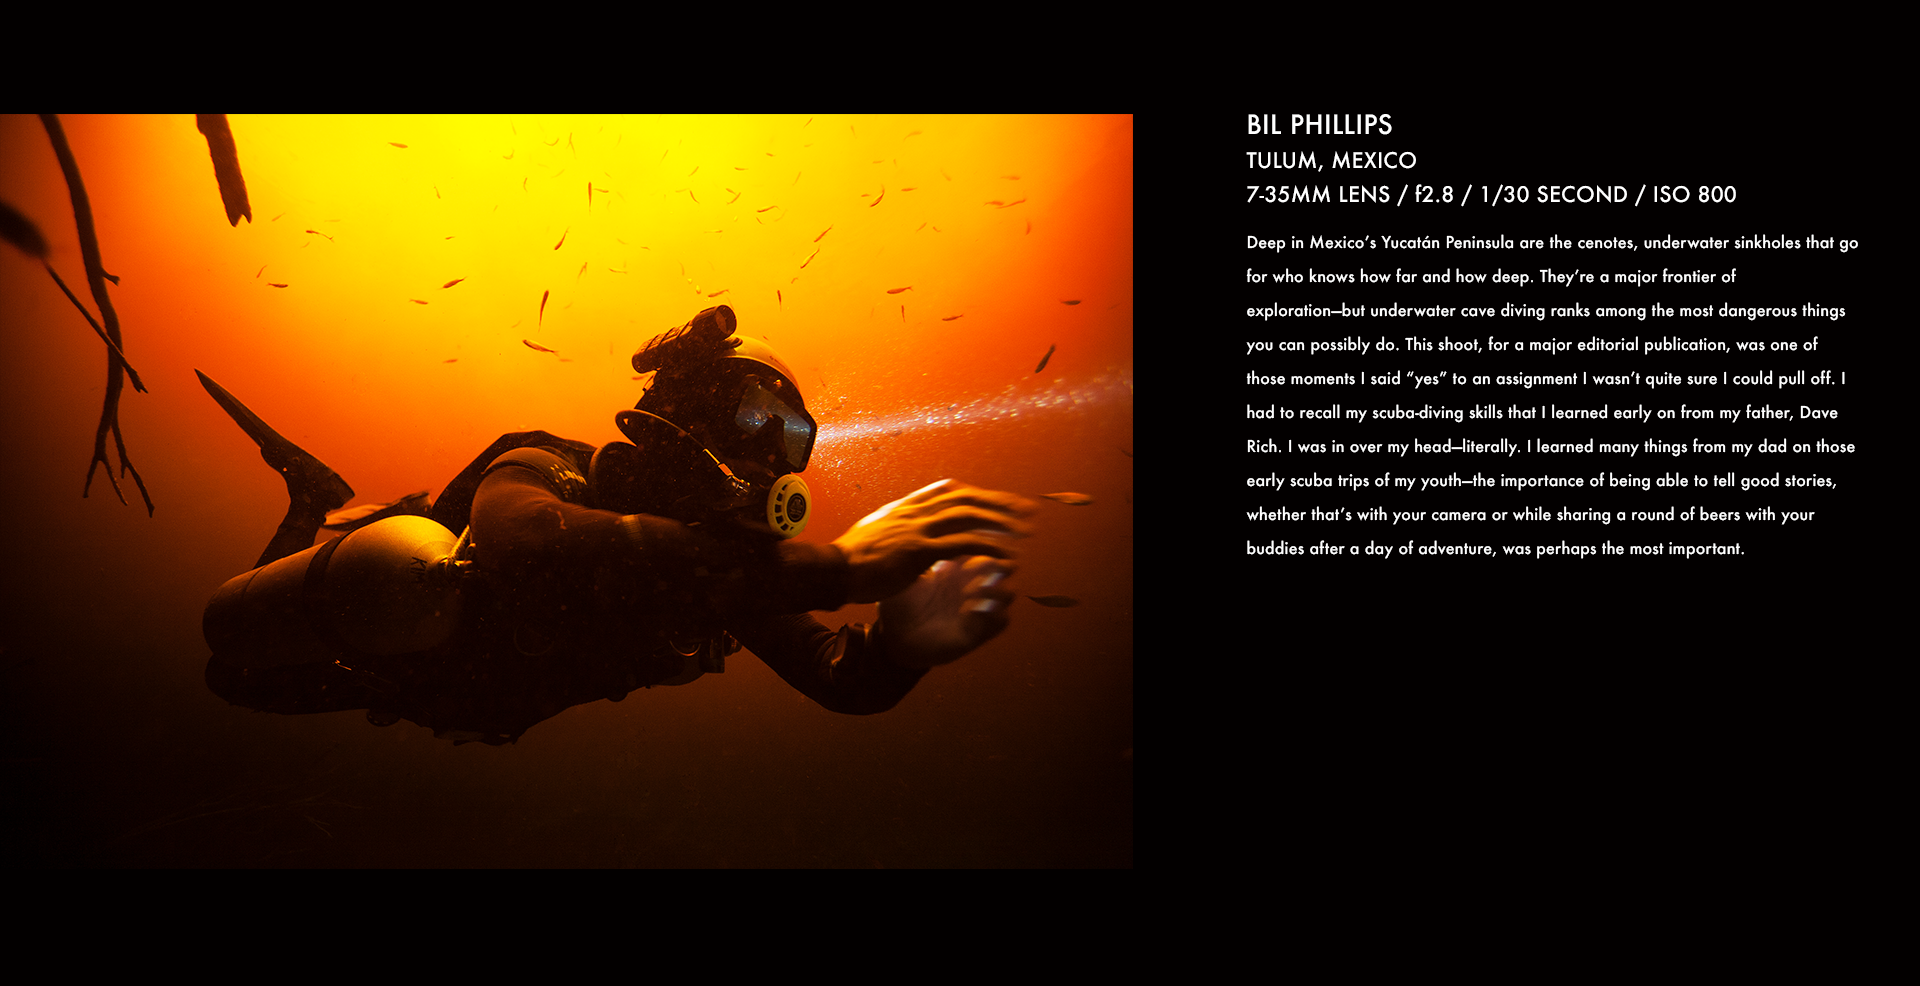  bill tulum, mexico, diving, underwater, action sports, caving, underwater cave, corey rich, stories behind the images 